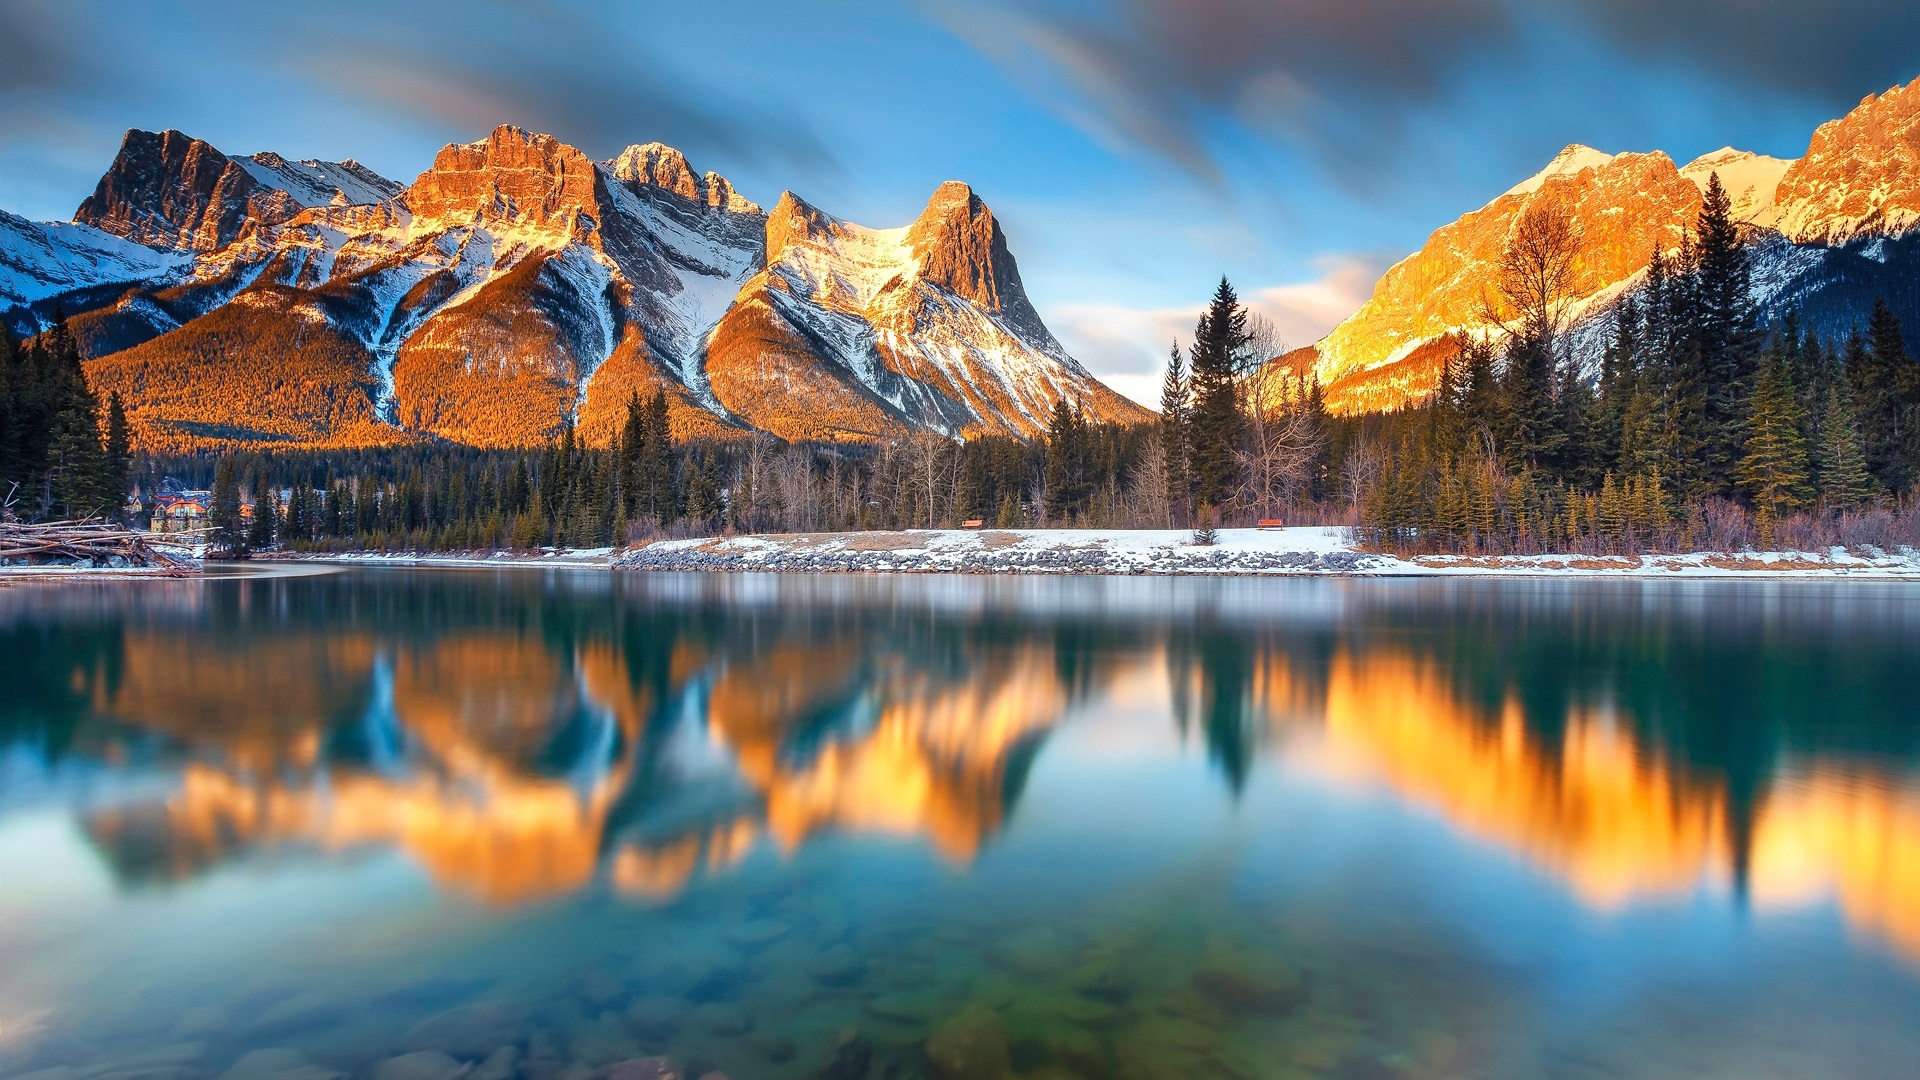 General 1920x1080 Canada Alberta lake reflection mountains rocks sky clouds forest trees water snow morning sunlight